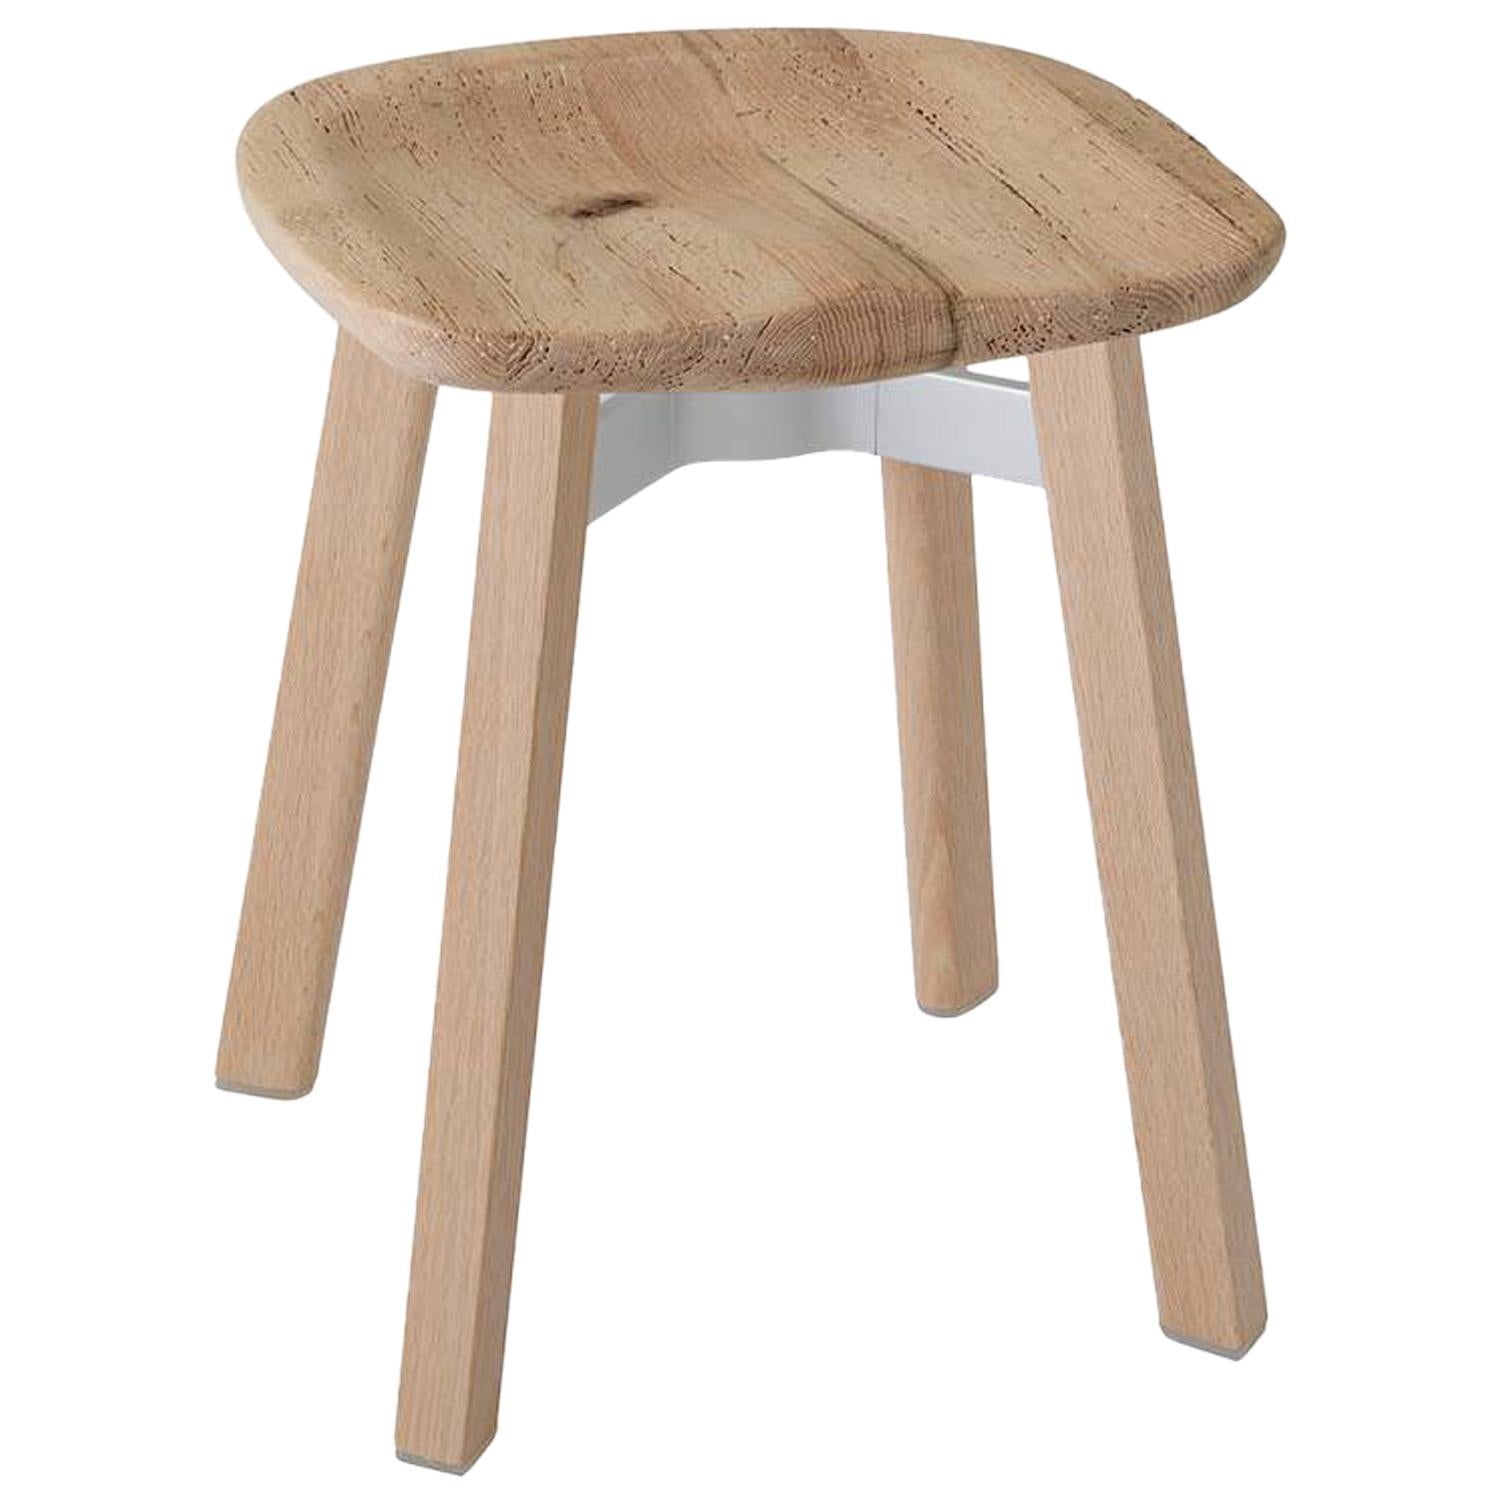 Emeco Su Small Stool in Wood w/ Reclaimed Oak Seat by Nendo For Sale